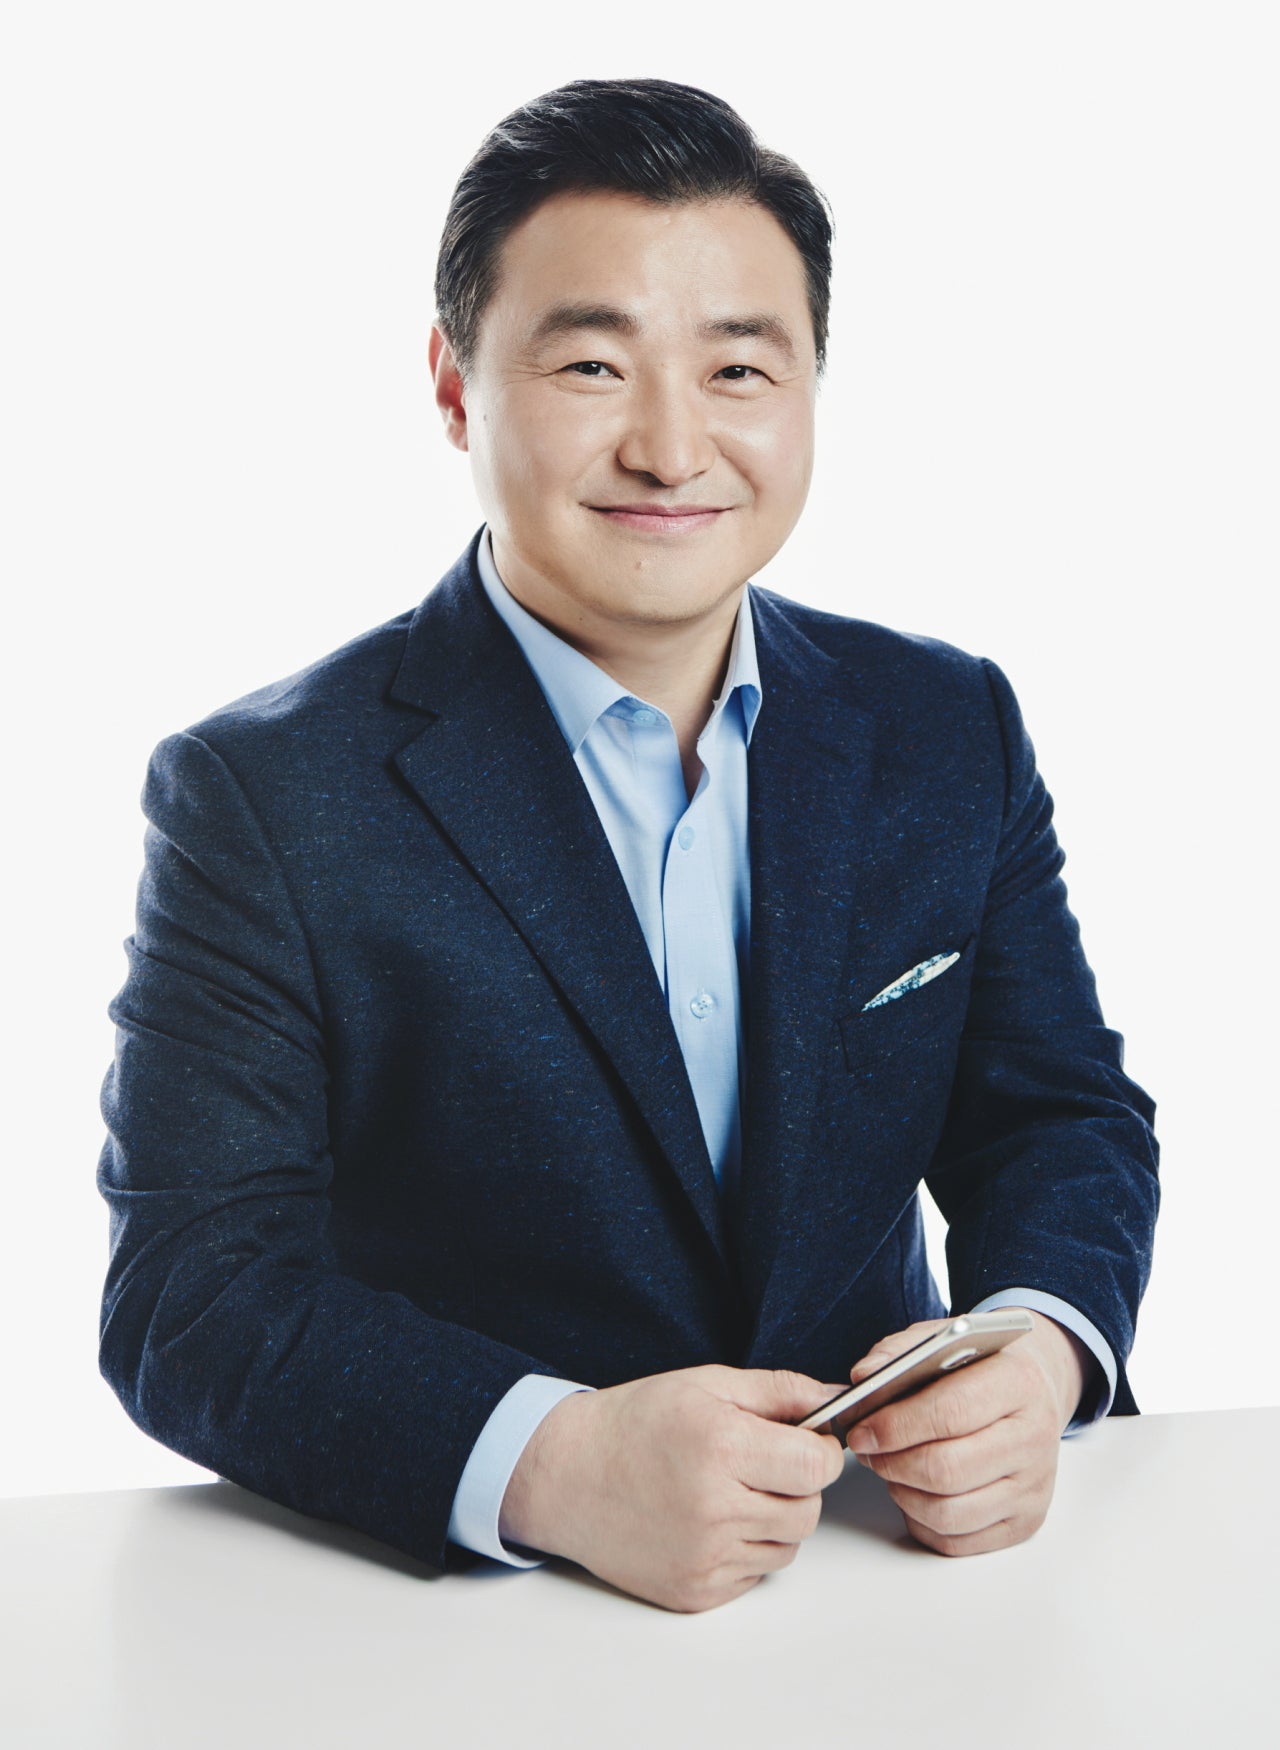 Roh Tae-moon - Boss change at Samsung’s mobile division could usher a new era for the company